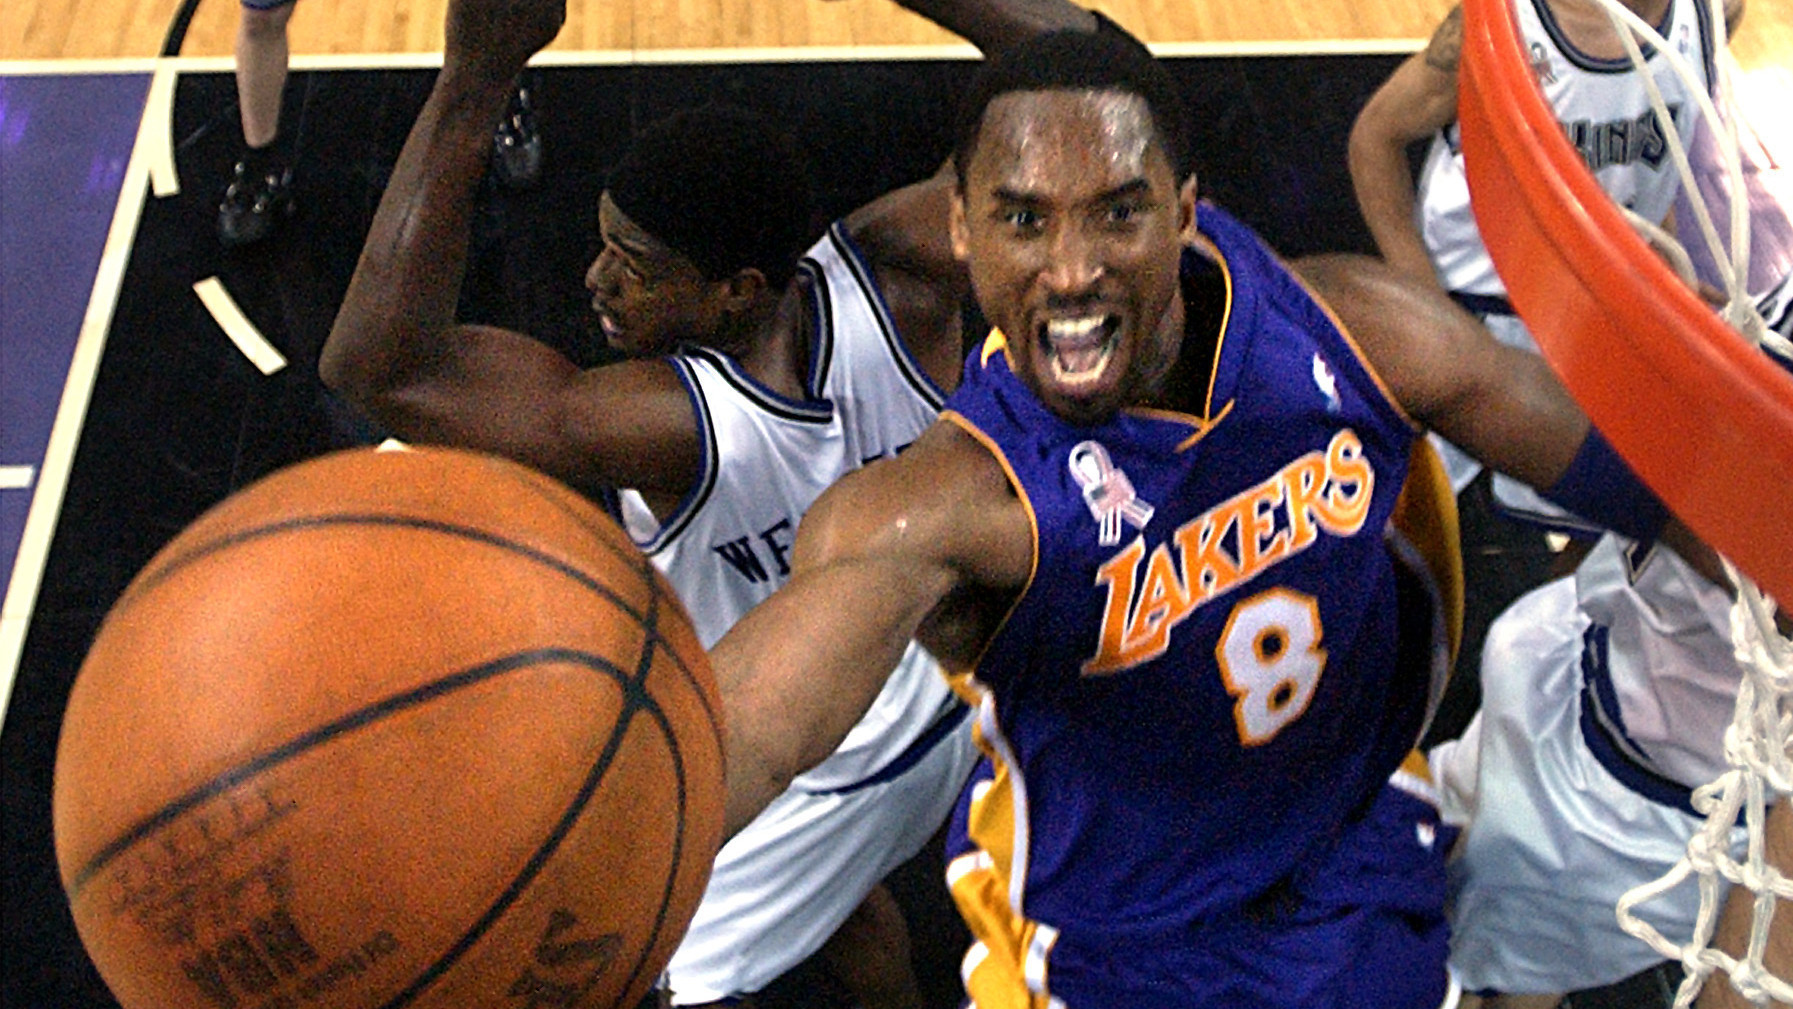 Remembering Kobe Bryant's 20-year career with the Lakers - LA Times1793 x 1009